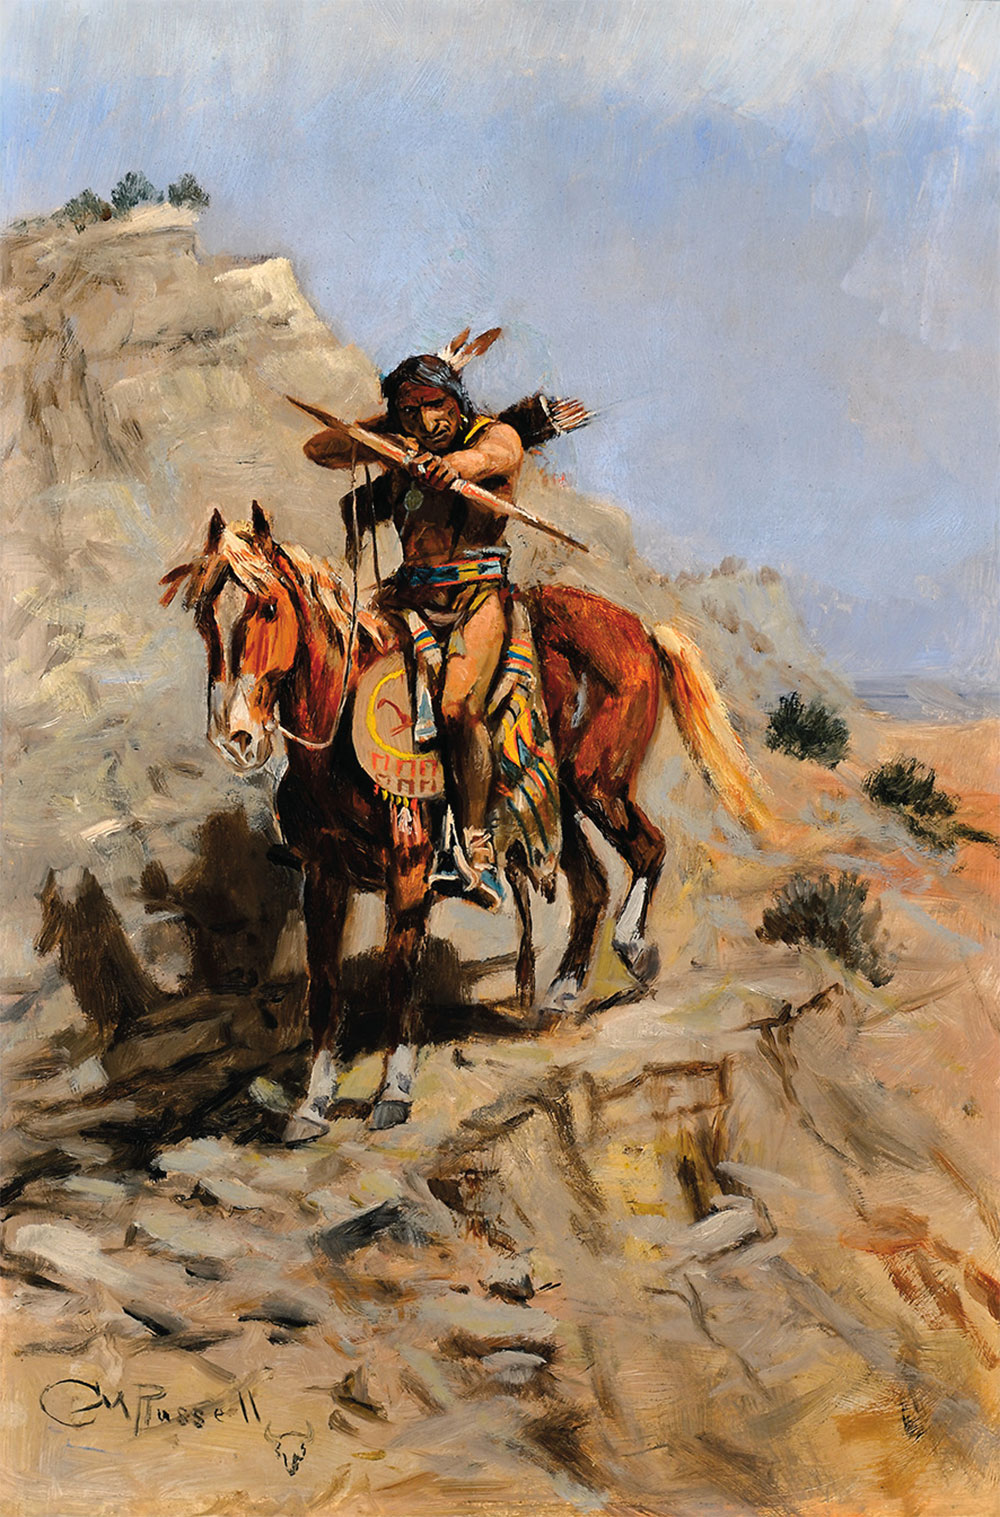 cm russell indian with bow